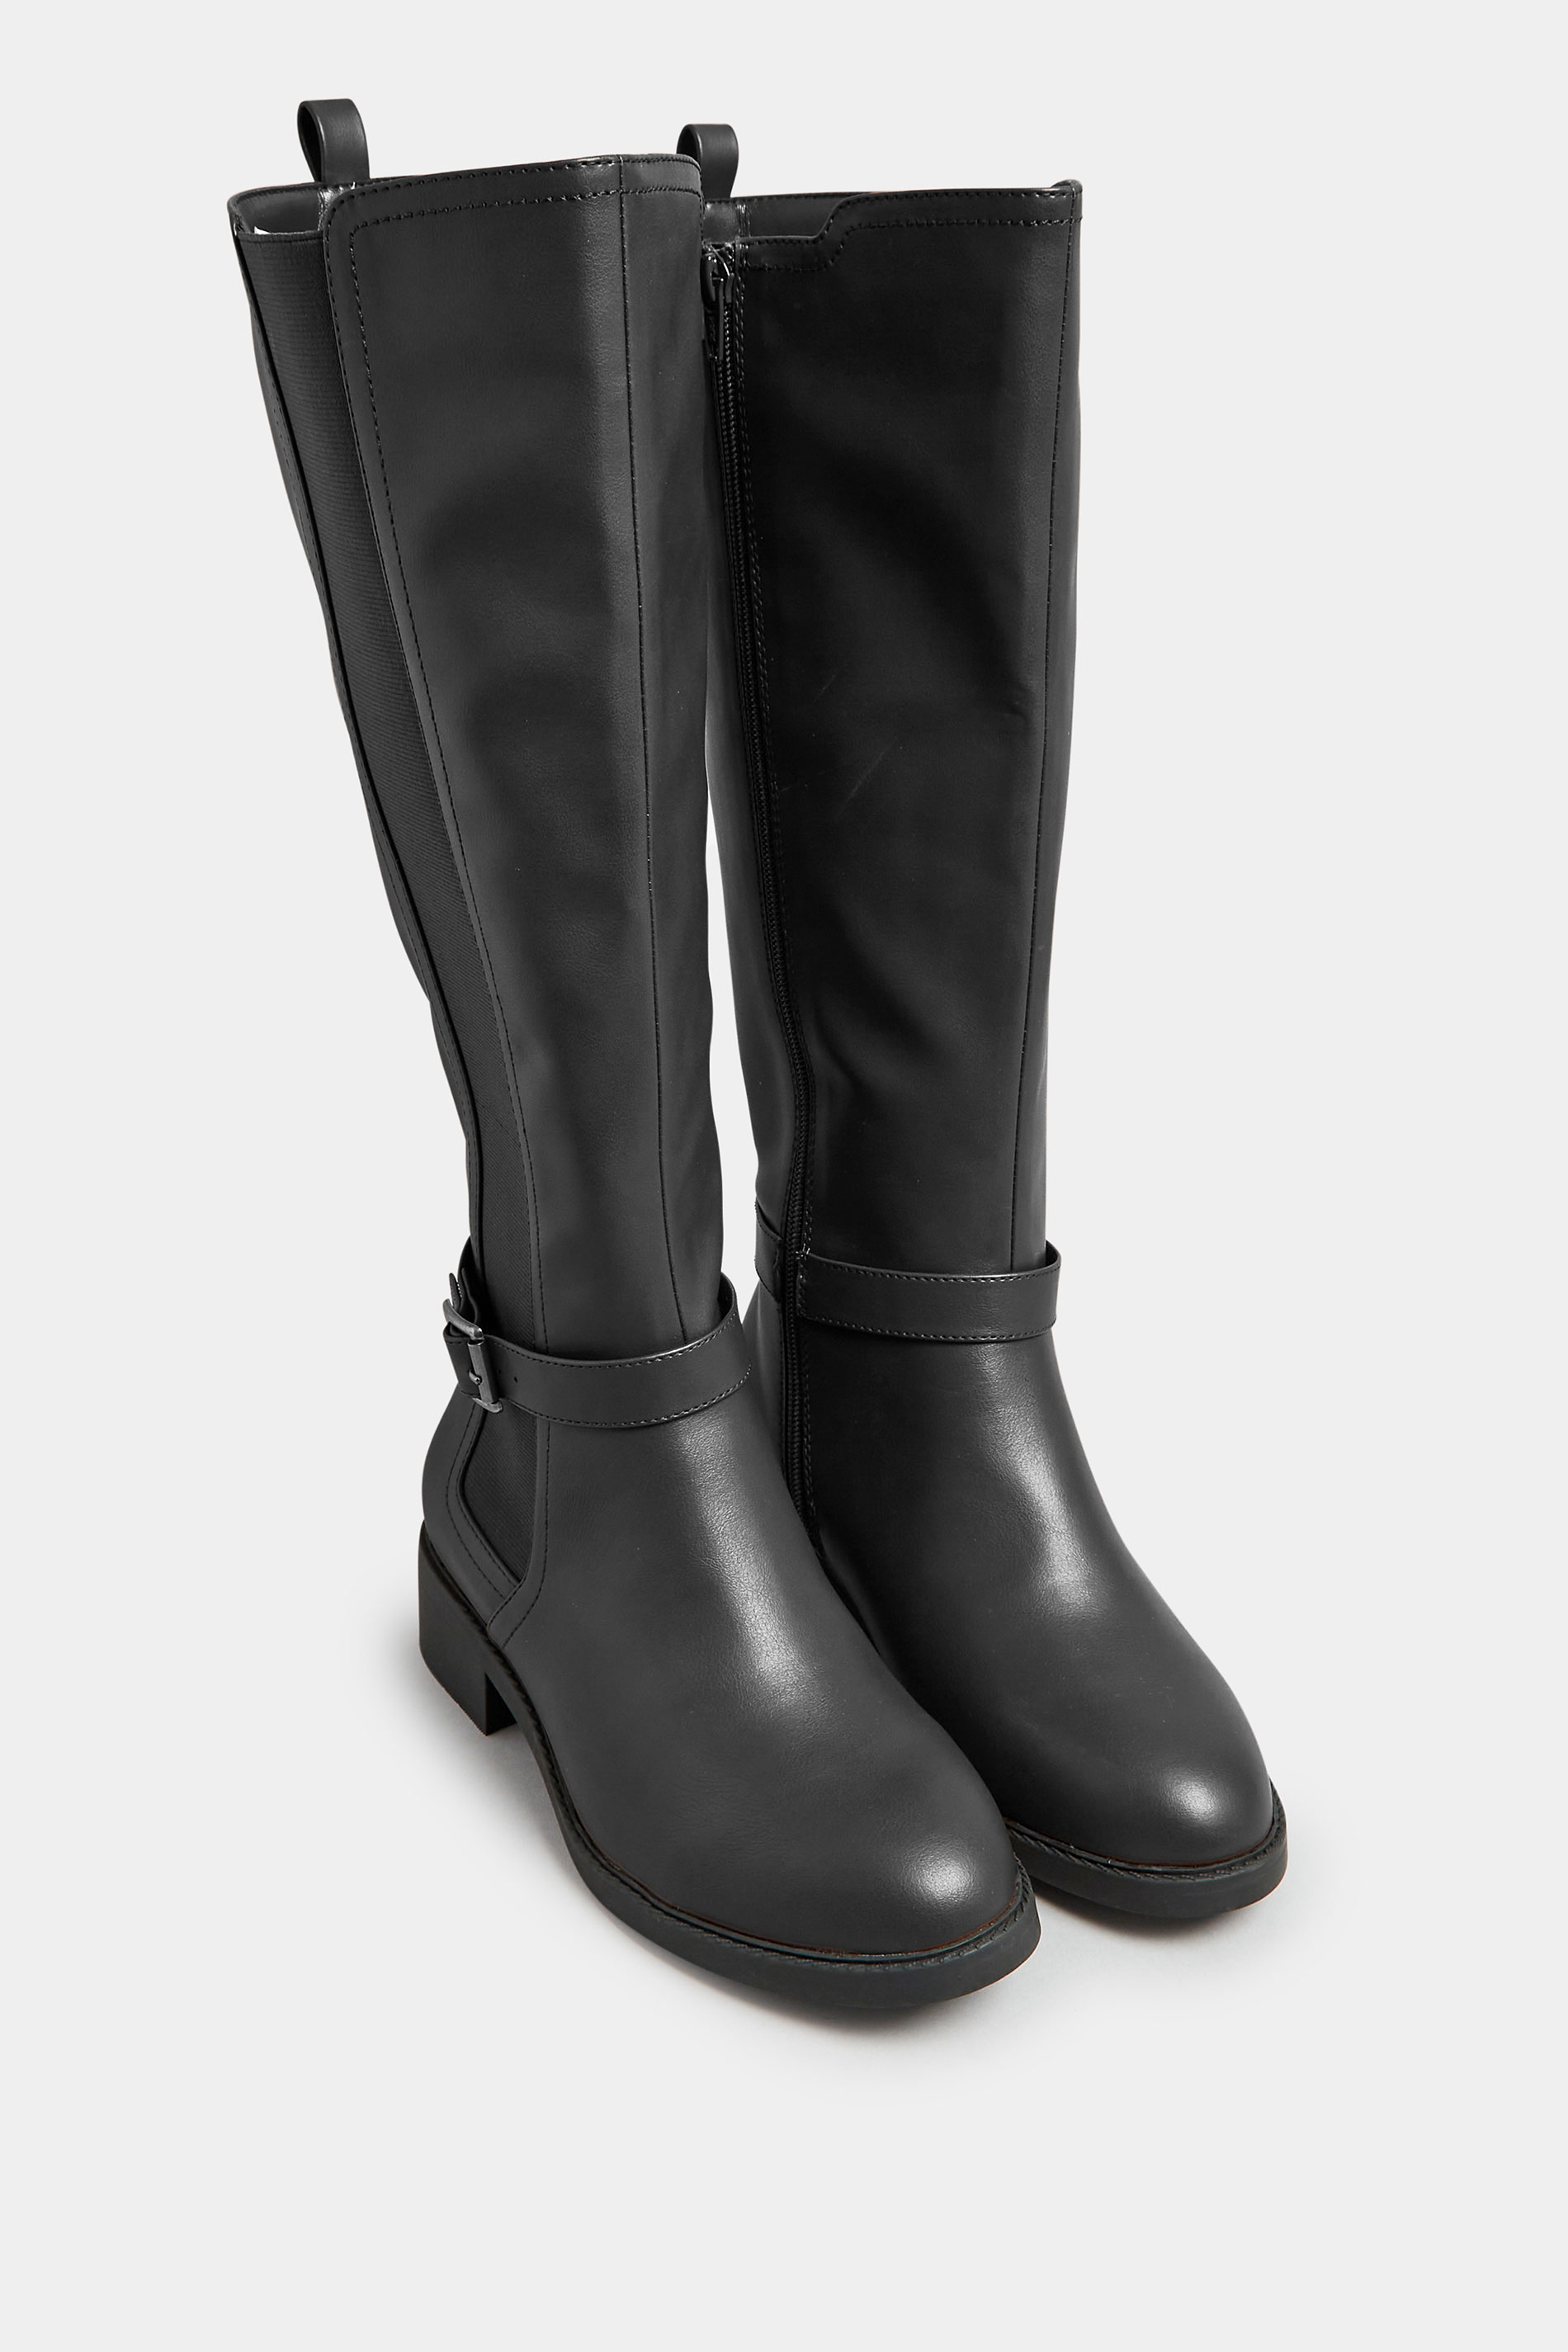 Black Faux Leather Buckle Knee High Boots In Wide E Fit & Extra Wide EEE Fit | Yours Clothing 2